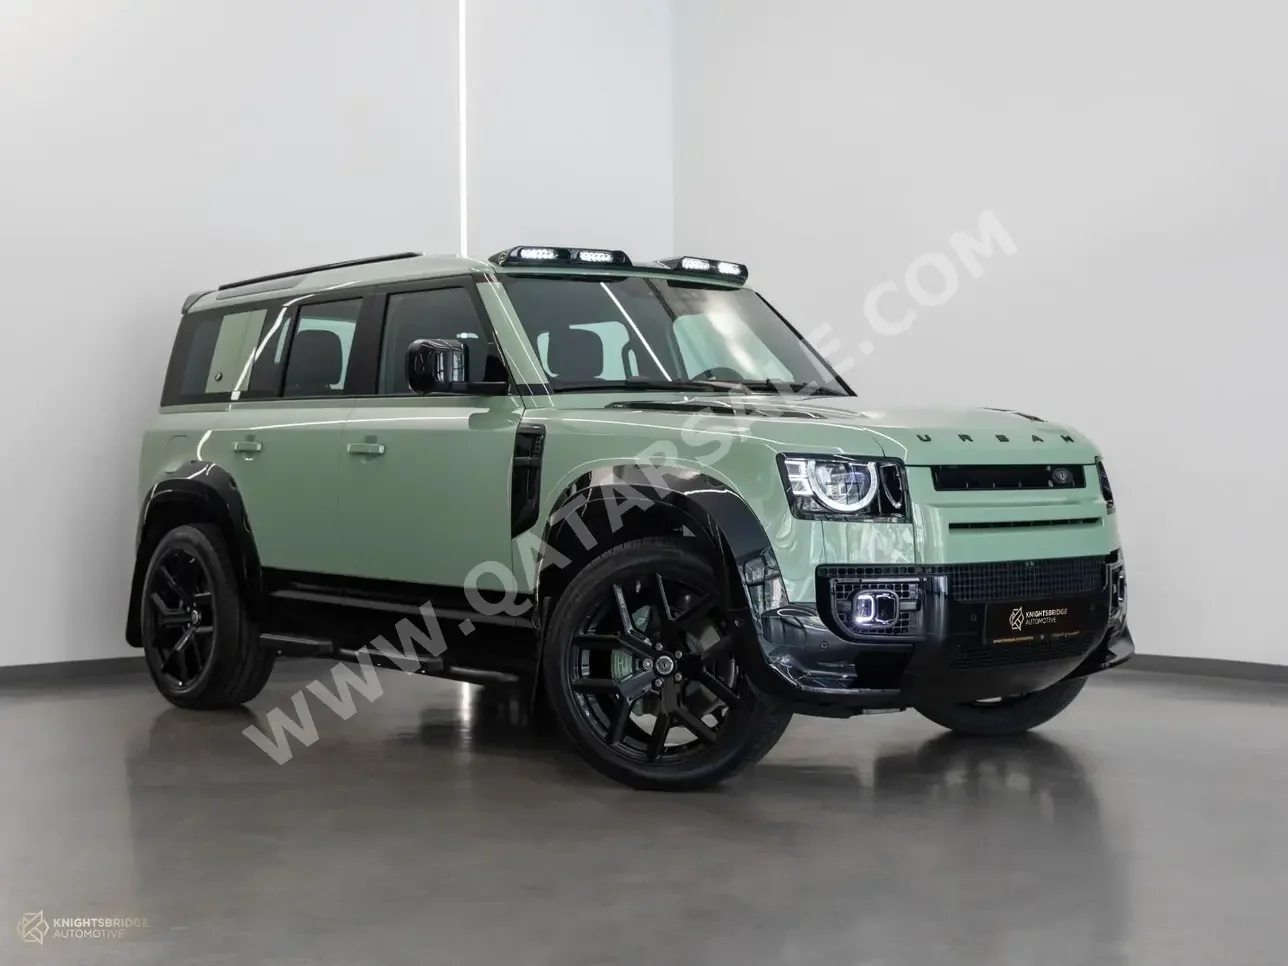  Land Rover  Defender  75th Limited Edition URBAN  2023  Automatic  12,500 Km  6 Cylinder  Four Wheel Drive (4WD)  SUV  Green  With Warranty